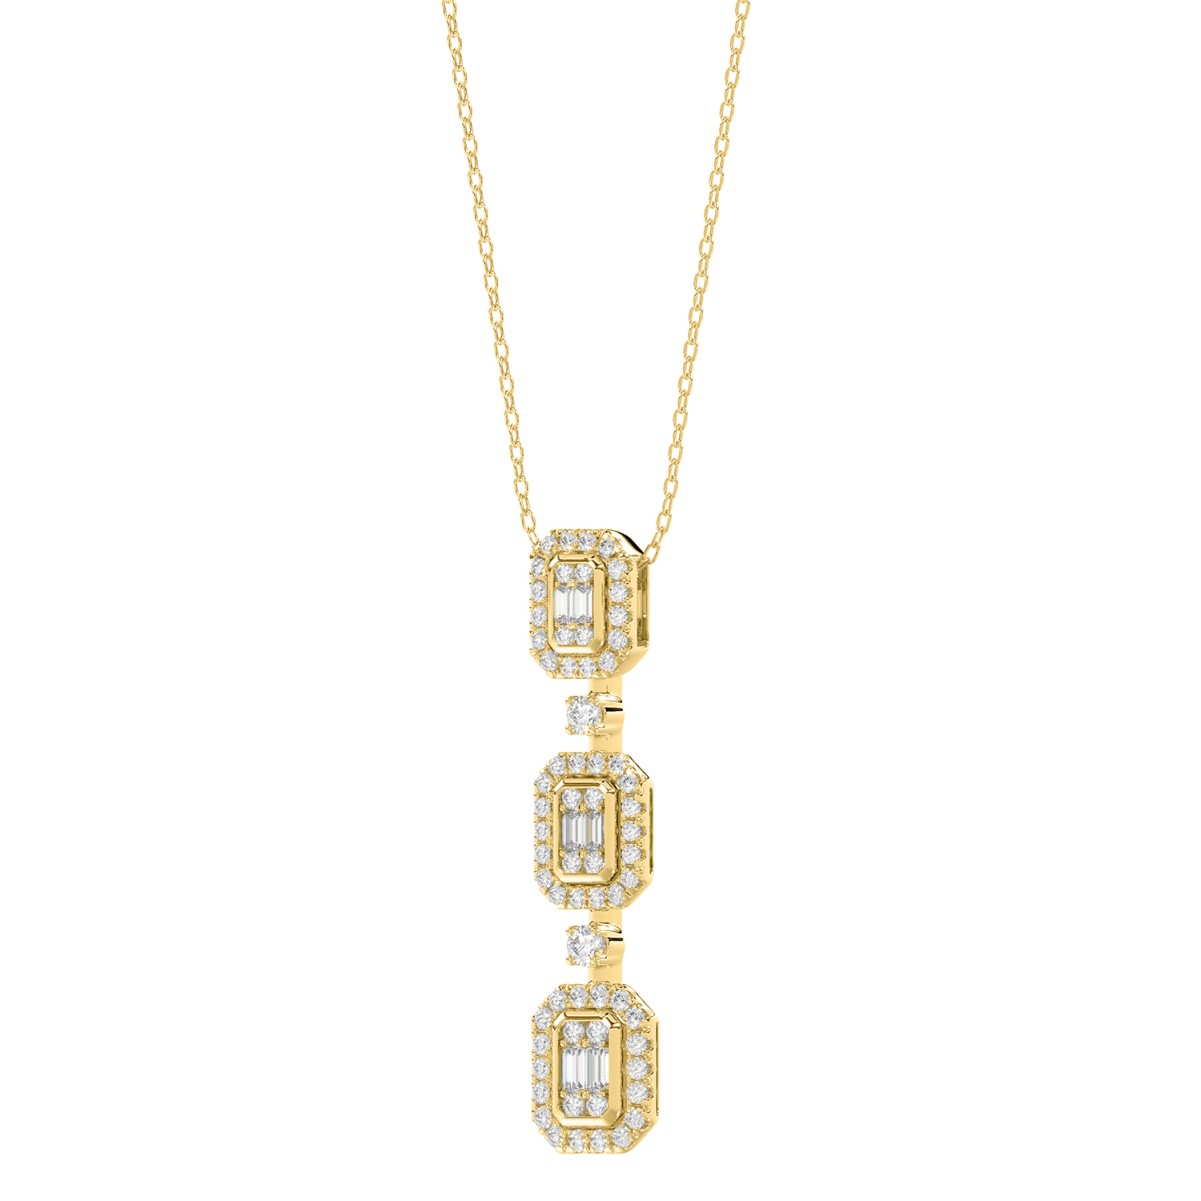 18K YELLOW GOLD 1/2CT ROUND/BAGUETTE DIAMOND LADIES PENDANT WITH CHAIN  